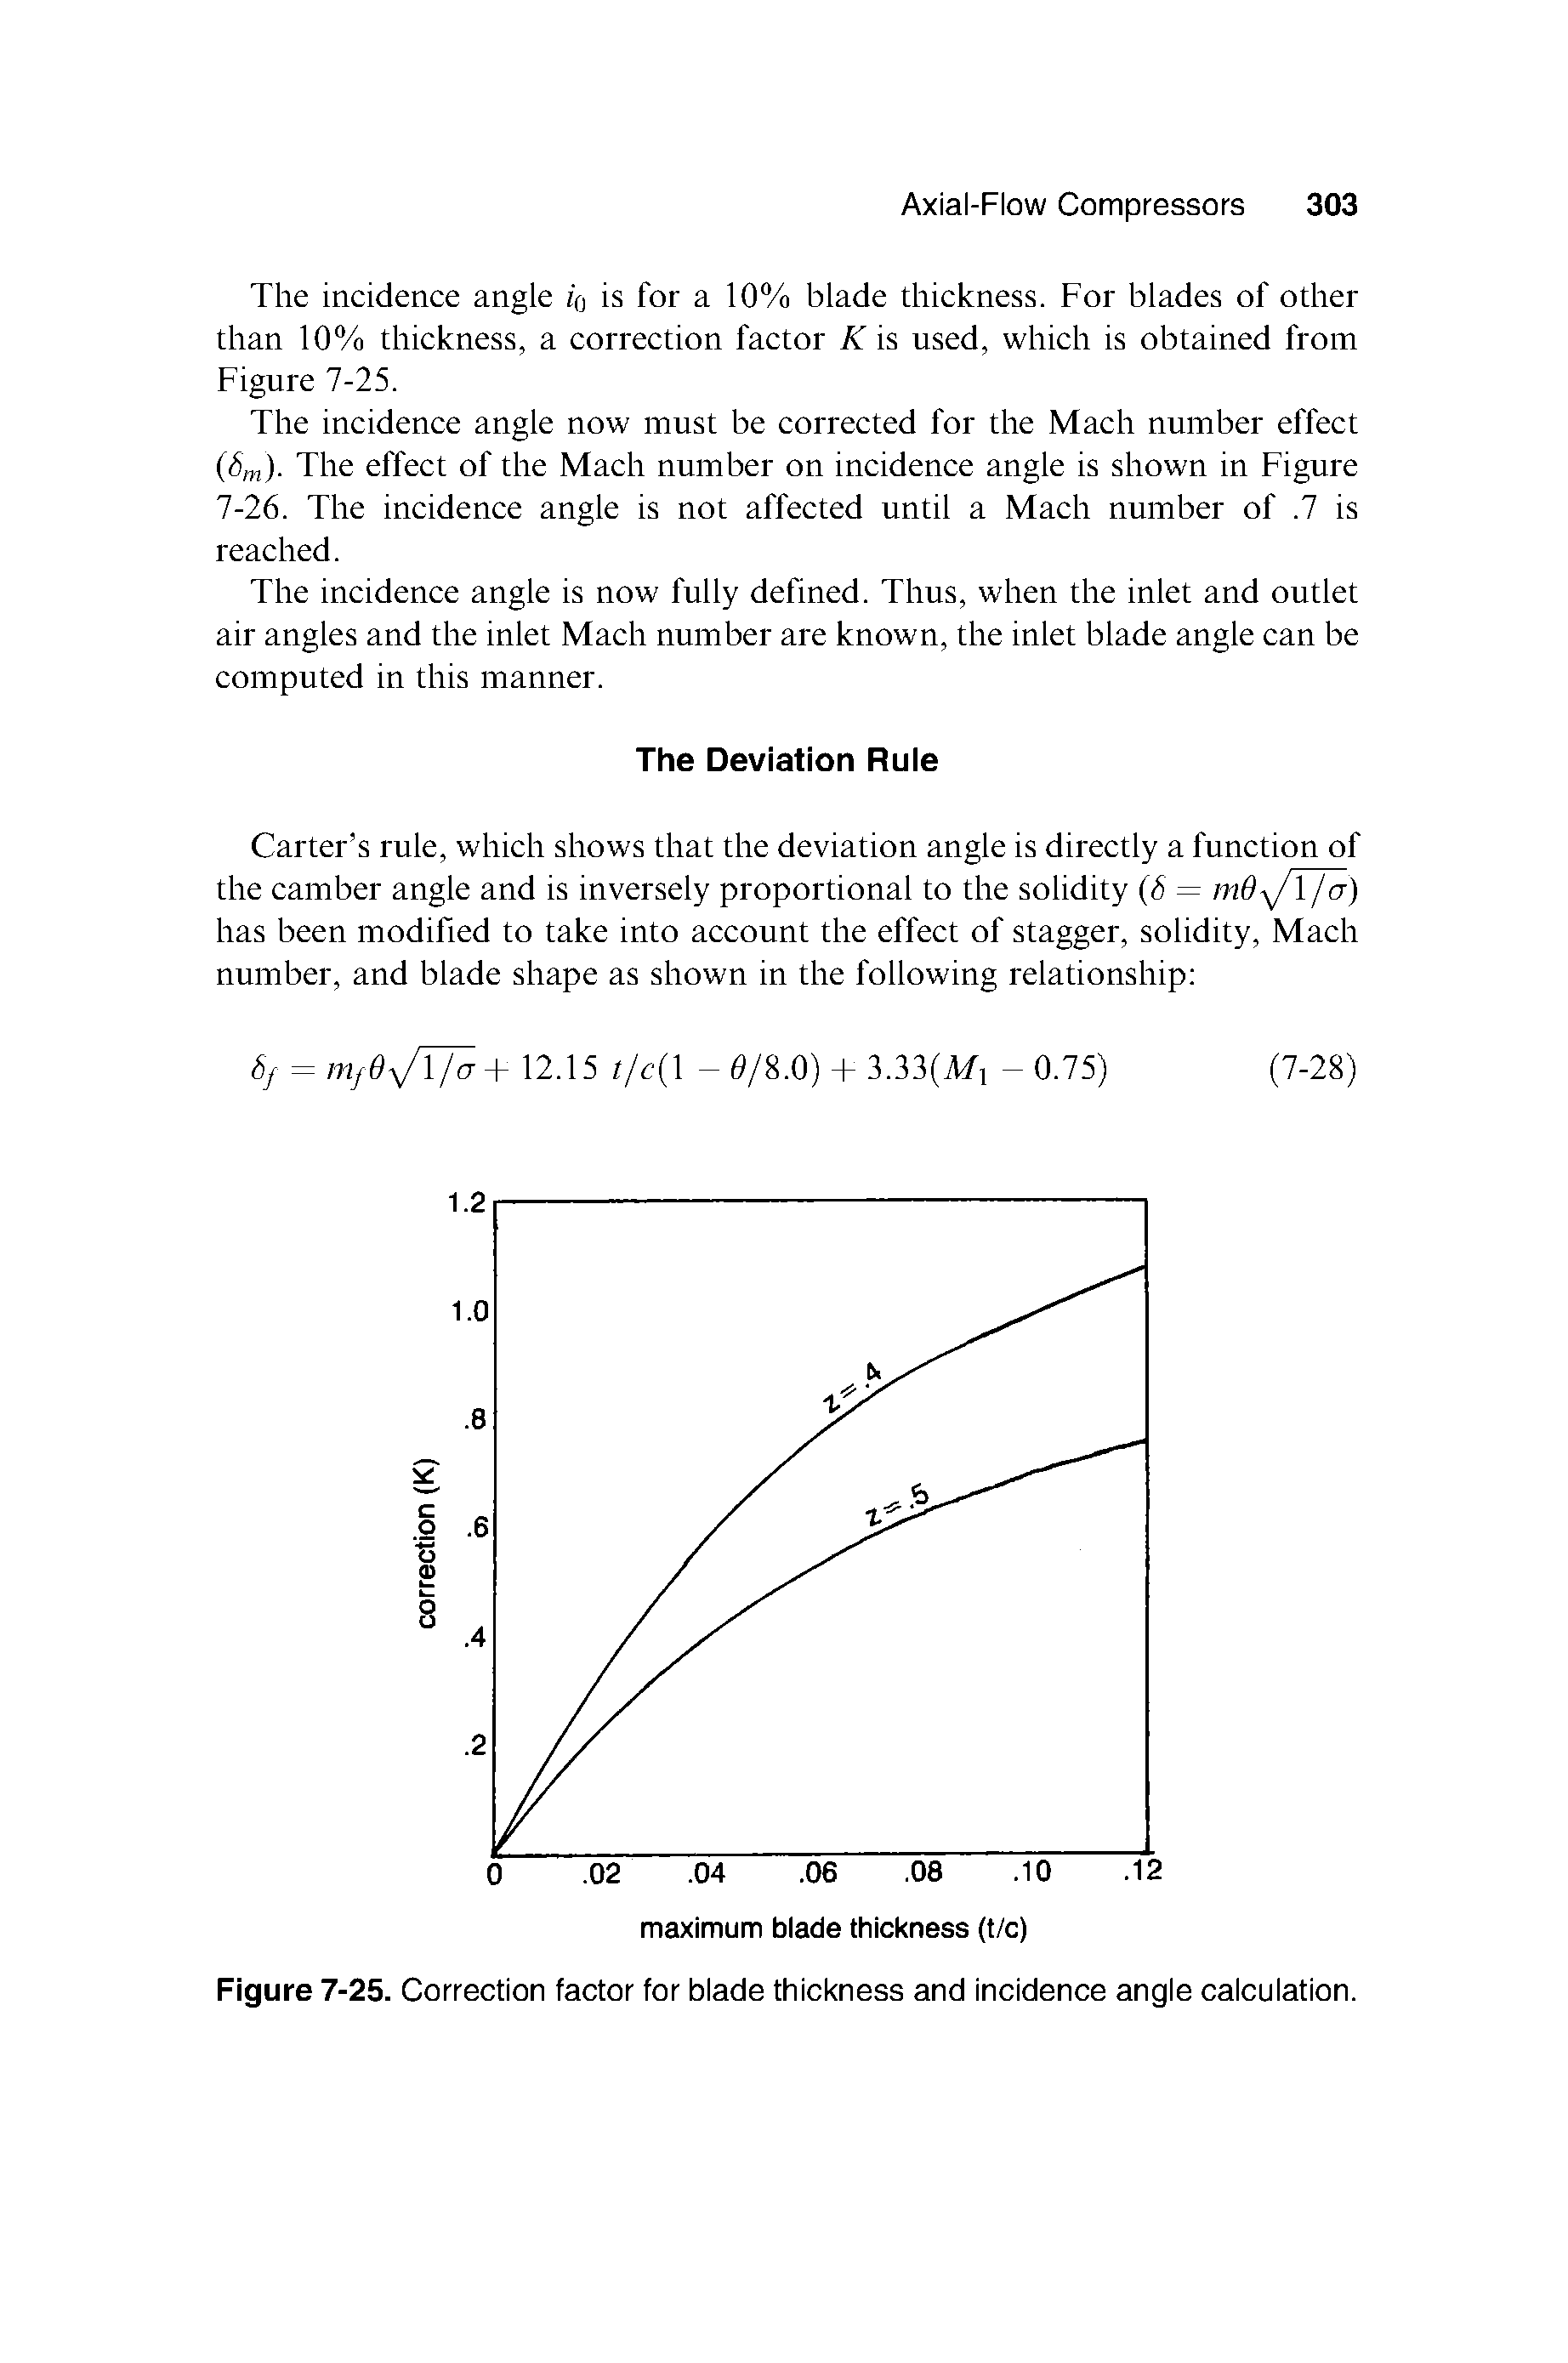 Figure 7-25. Correction factor for blade thickness and incidence angle calculation.